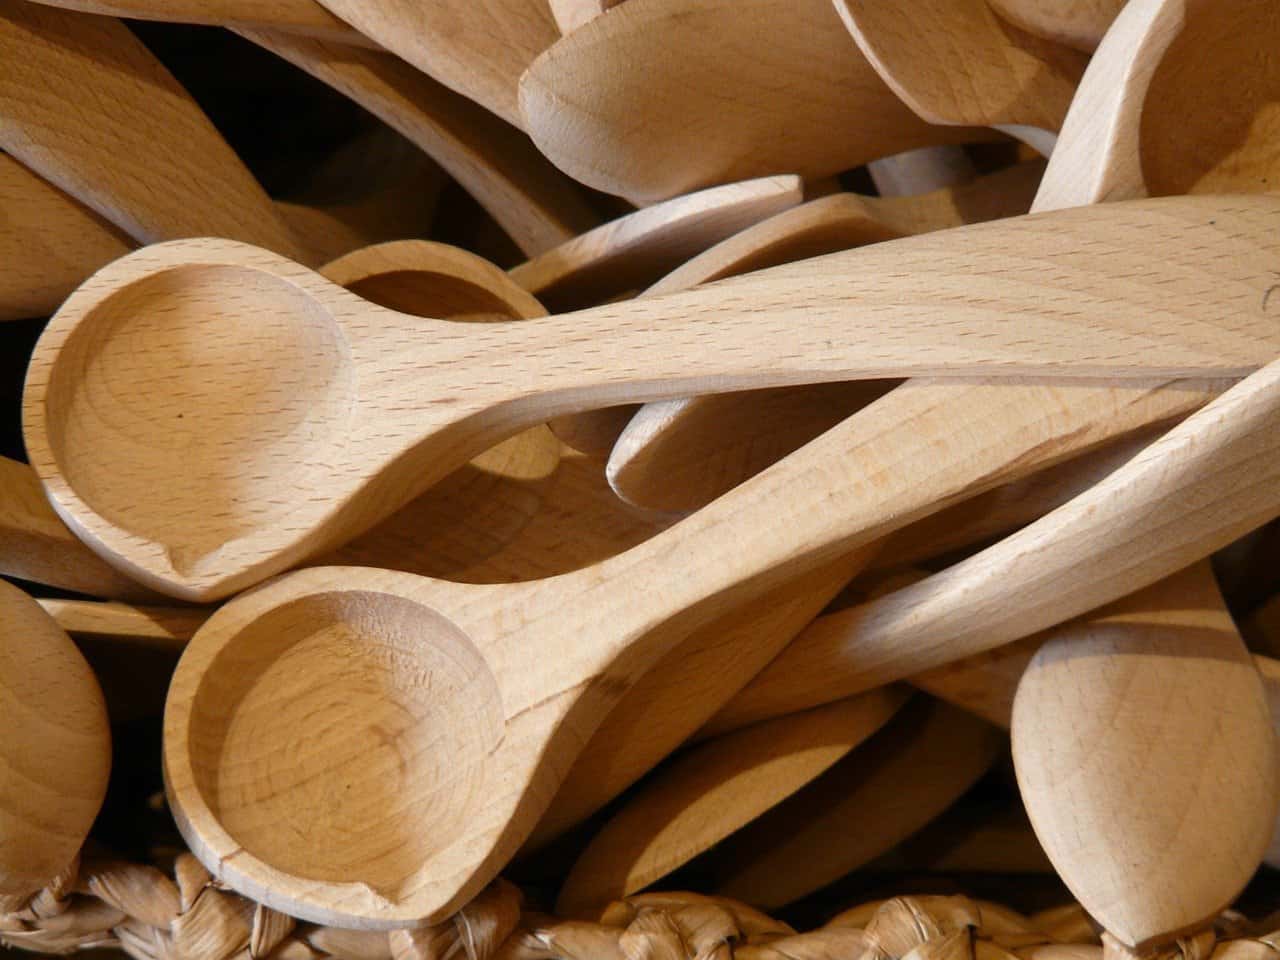 How To Carve Wooden Spoons - The Whittling Guide